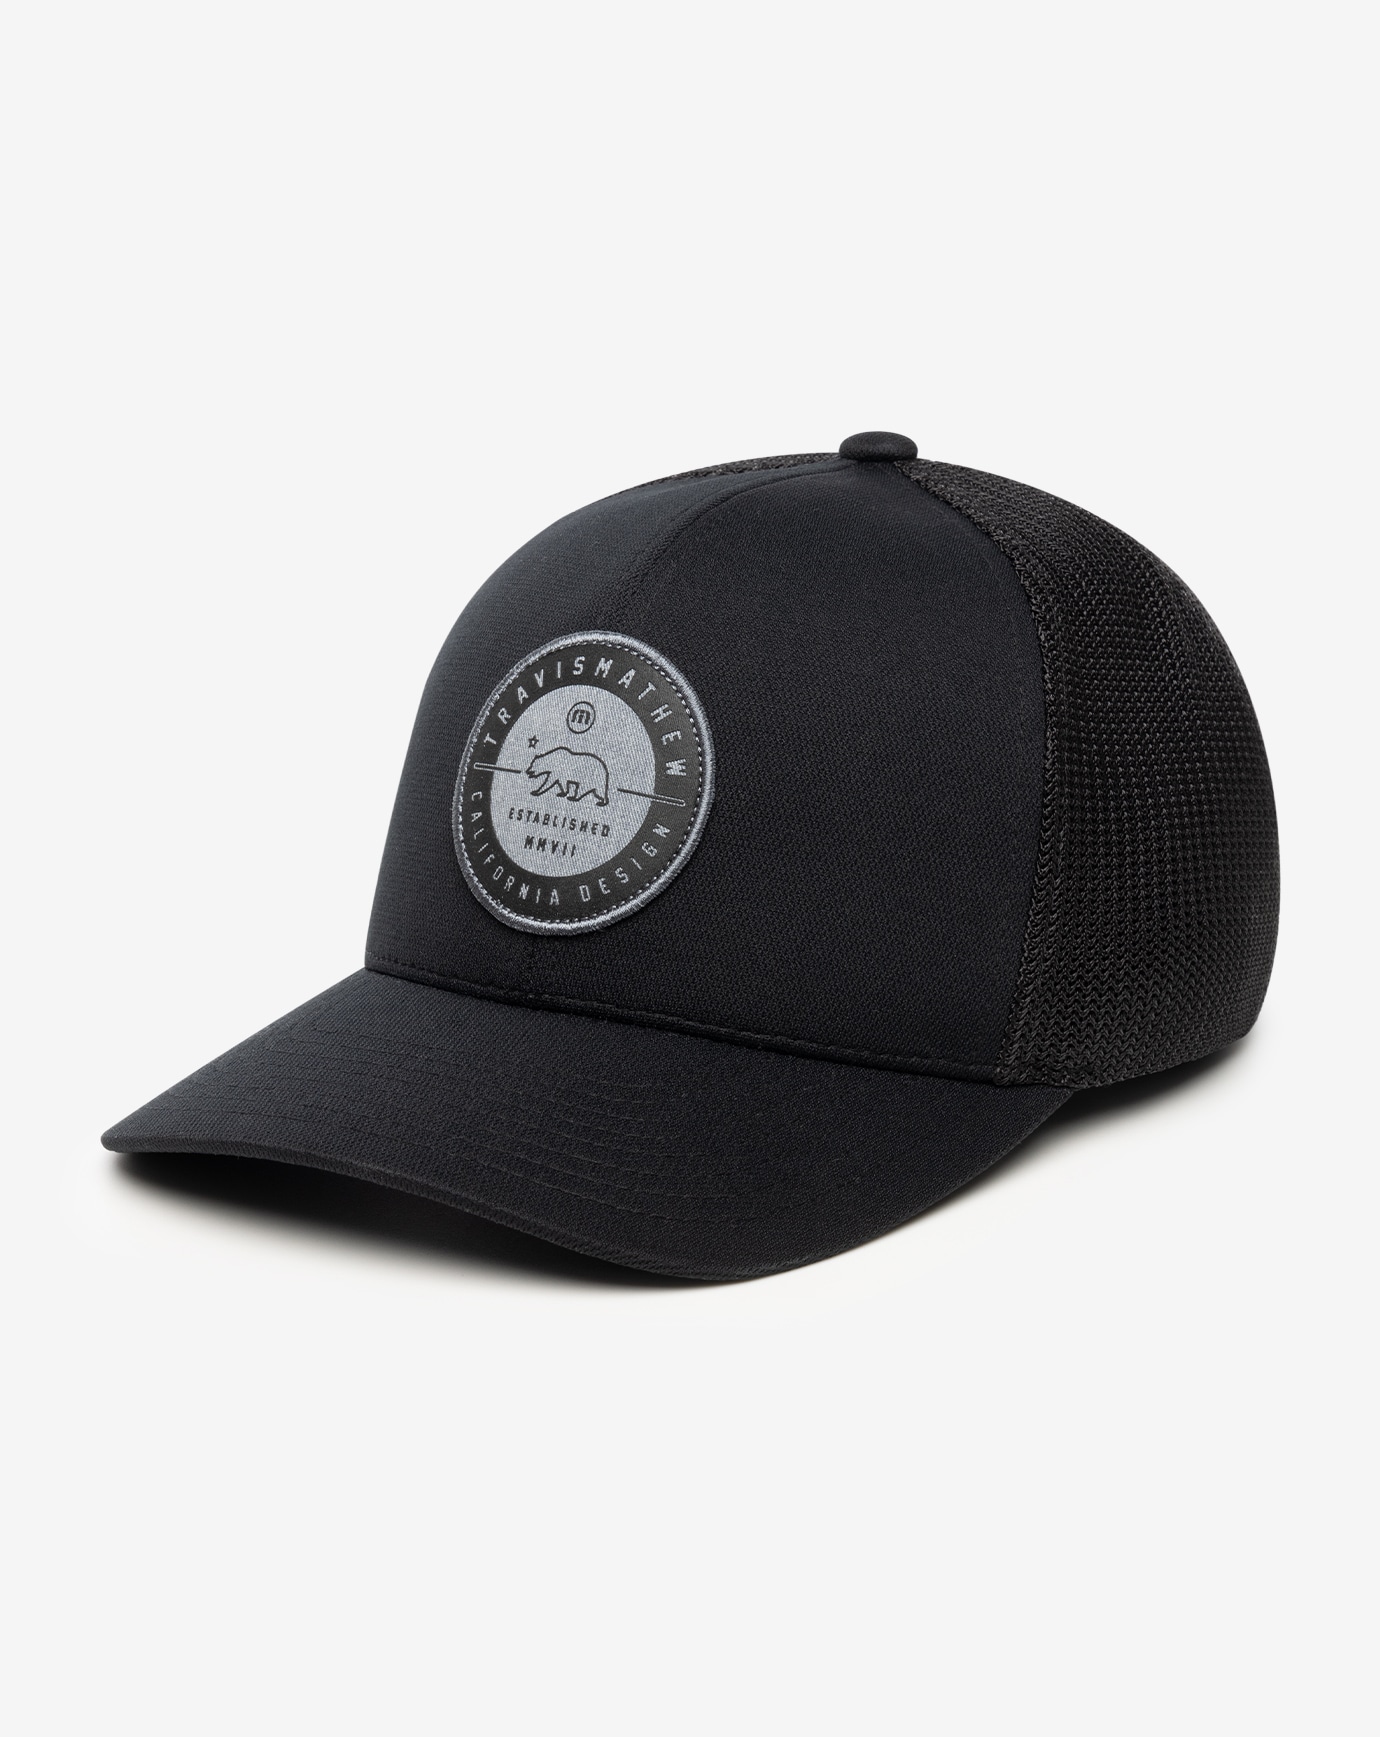 BLACK BEAR 2.0 FITTED HAT Image Thumbnail 2